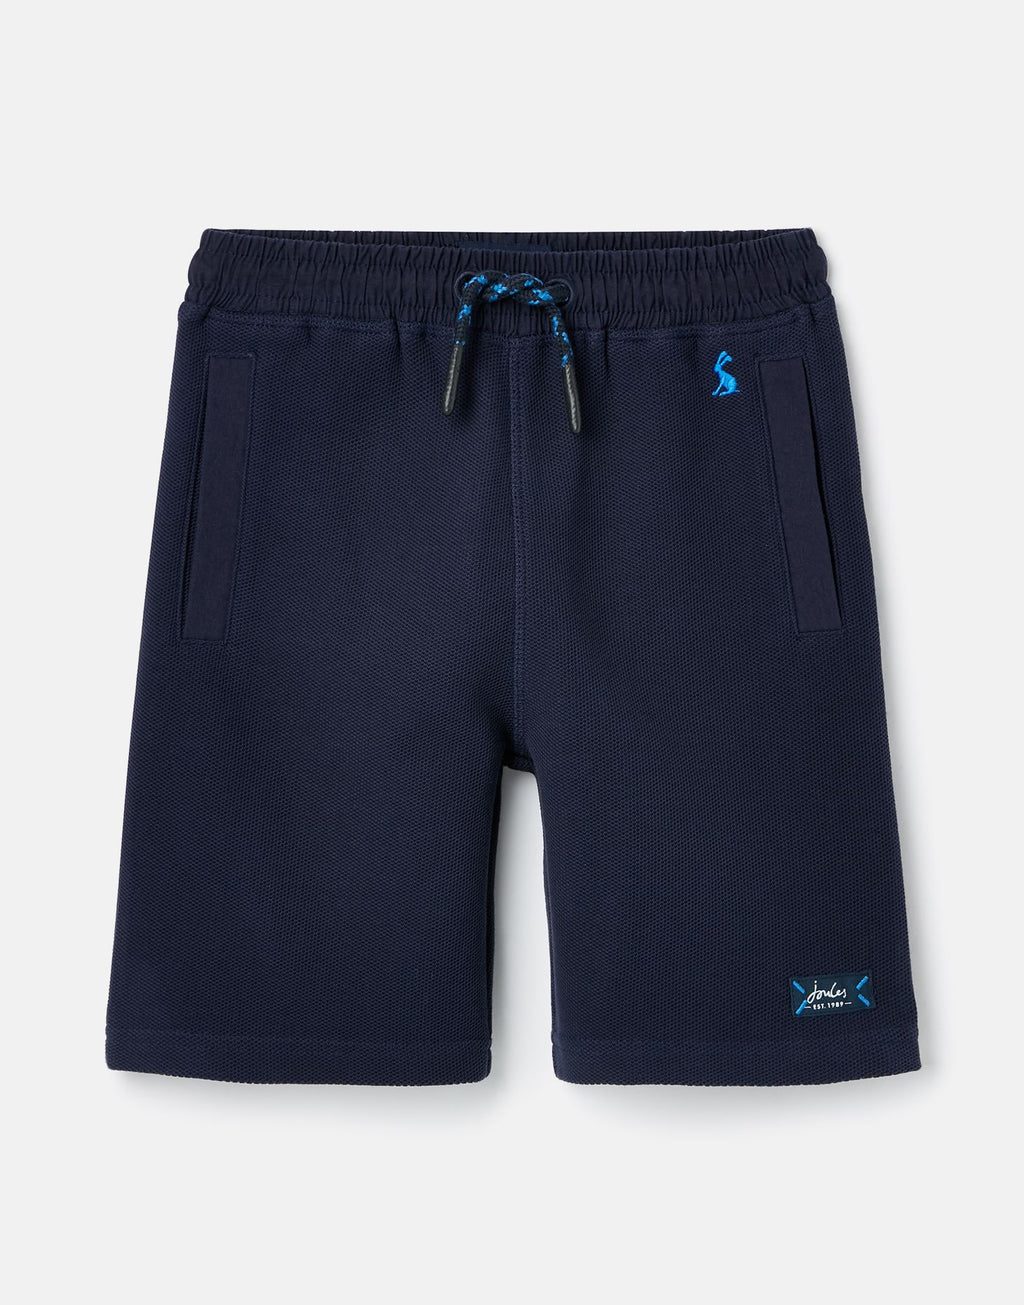 Joules Jed shorts